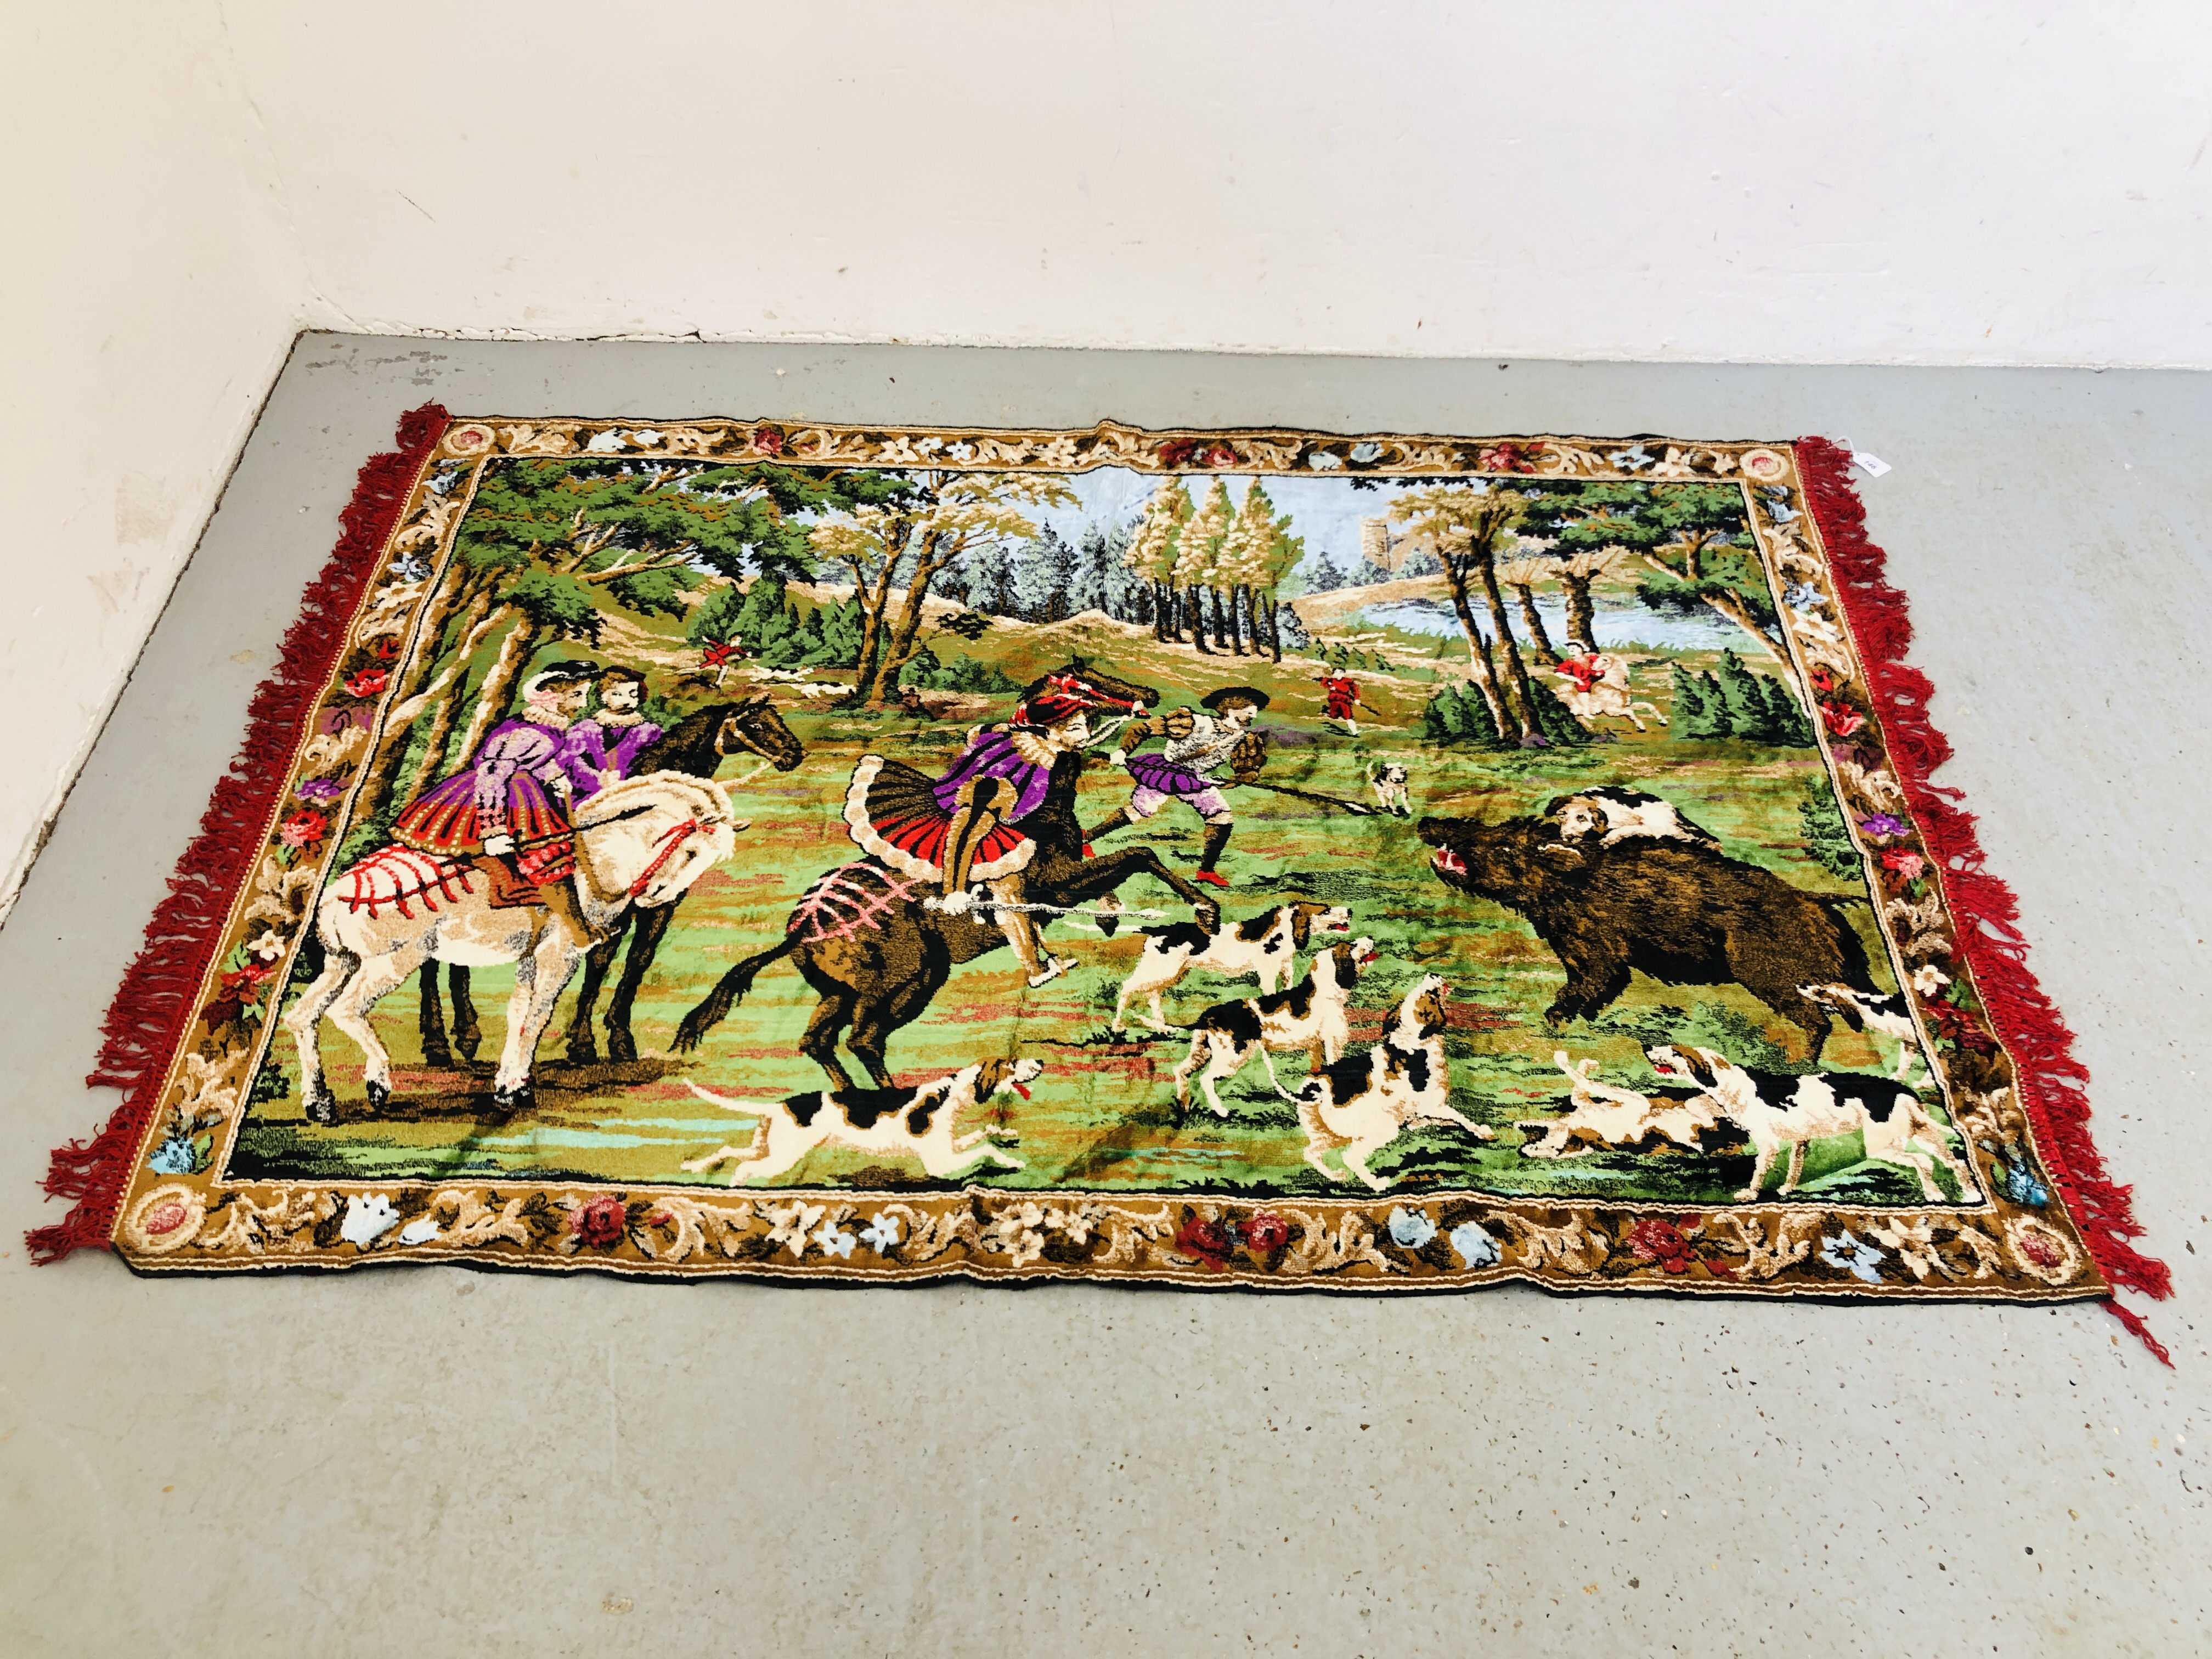 LARGE WALL HANGING DEPICTING A HUNTING SCENE WIDTH 174CM. HEIGHT 117CM.